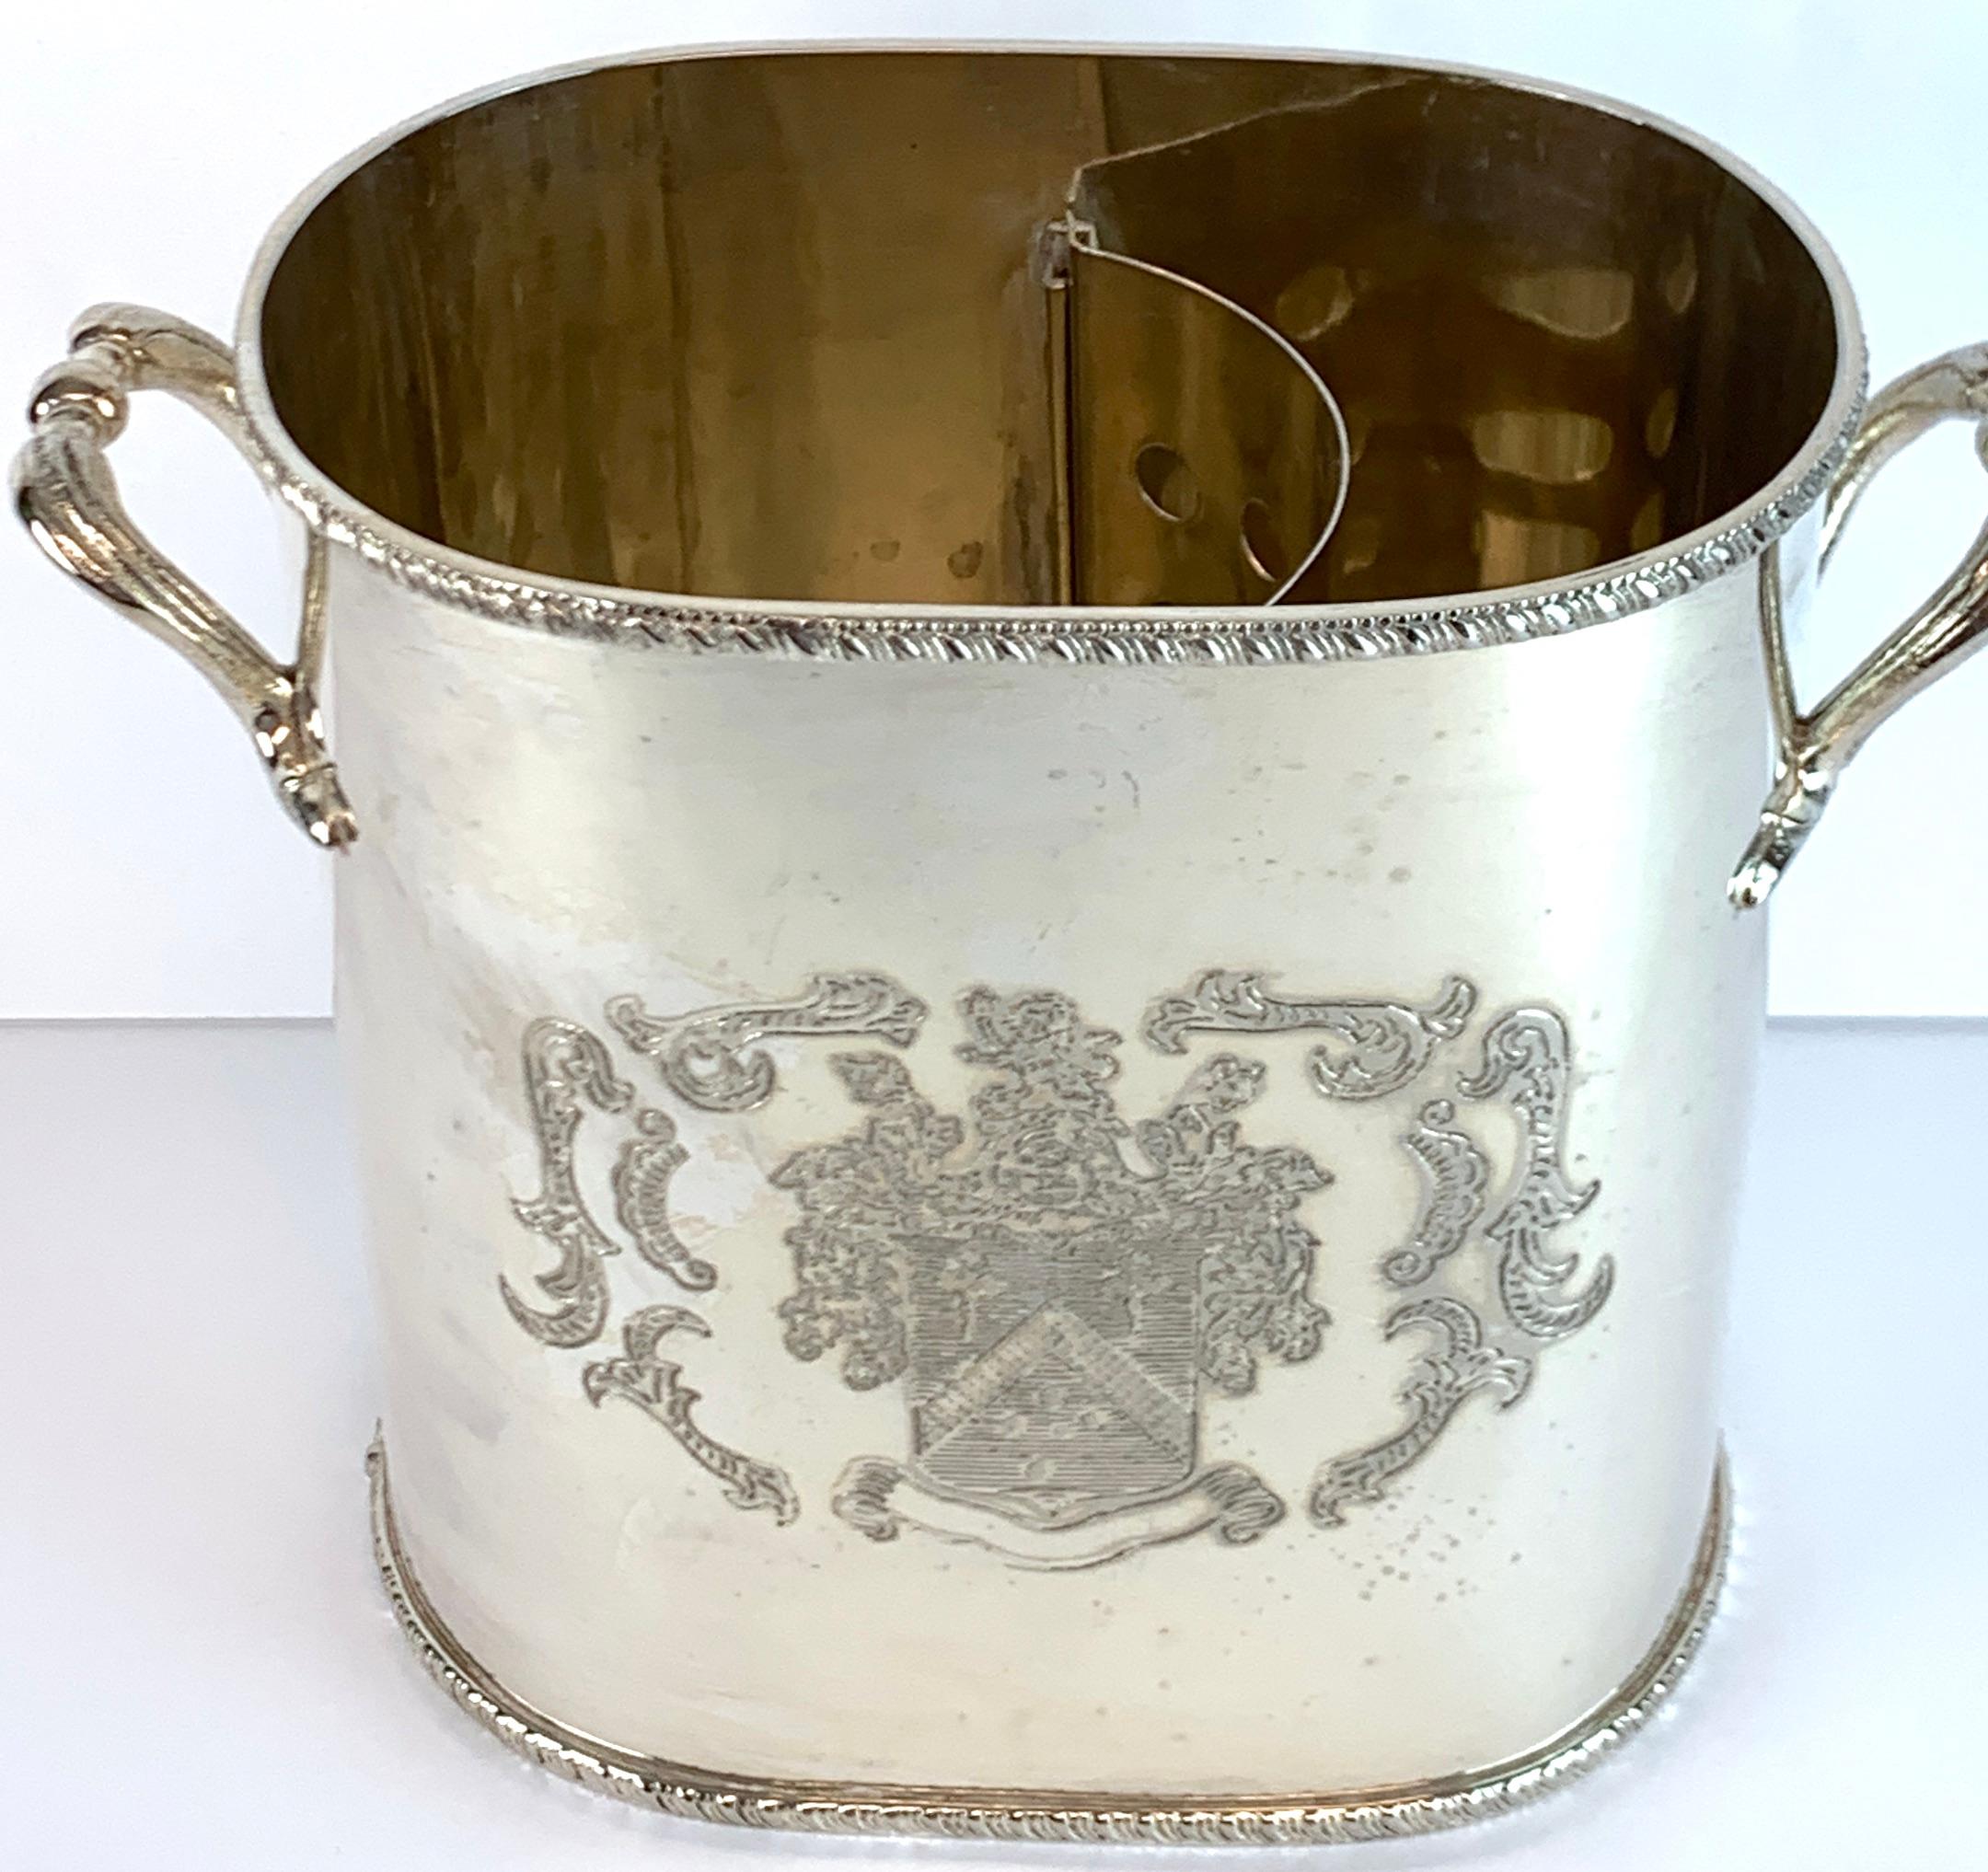 English silver plated armorial oval wine cooler, handled, with removable pierced bottle caddy, the interior measures, 8.5